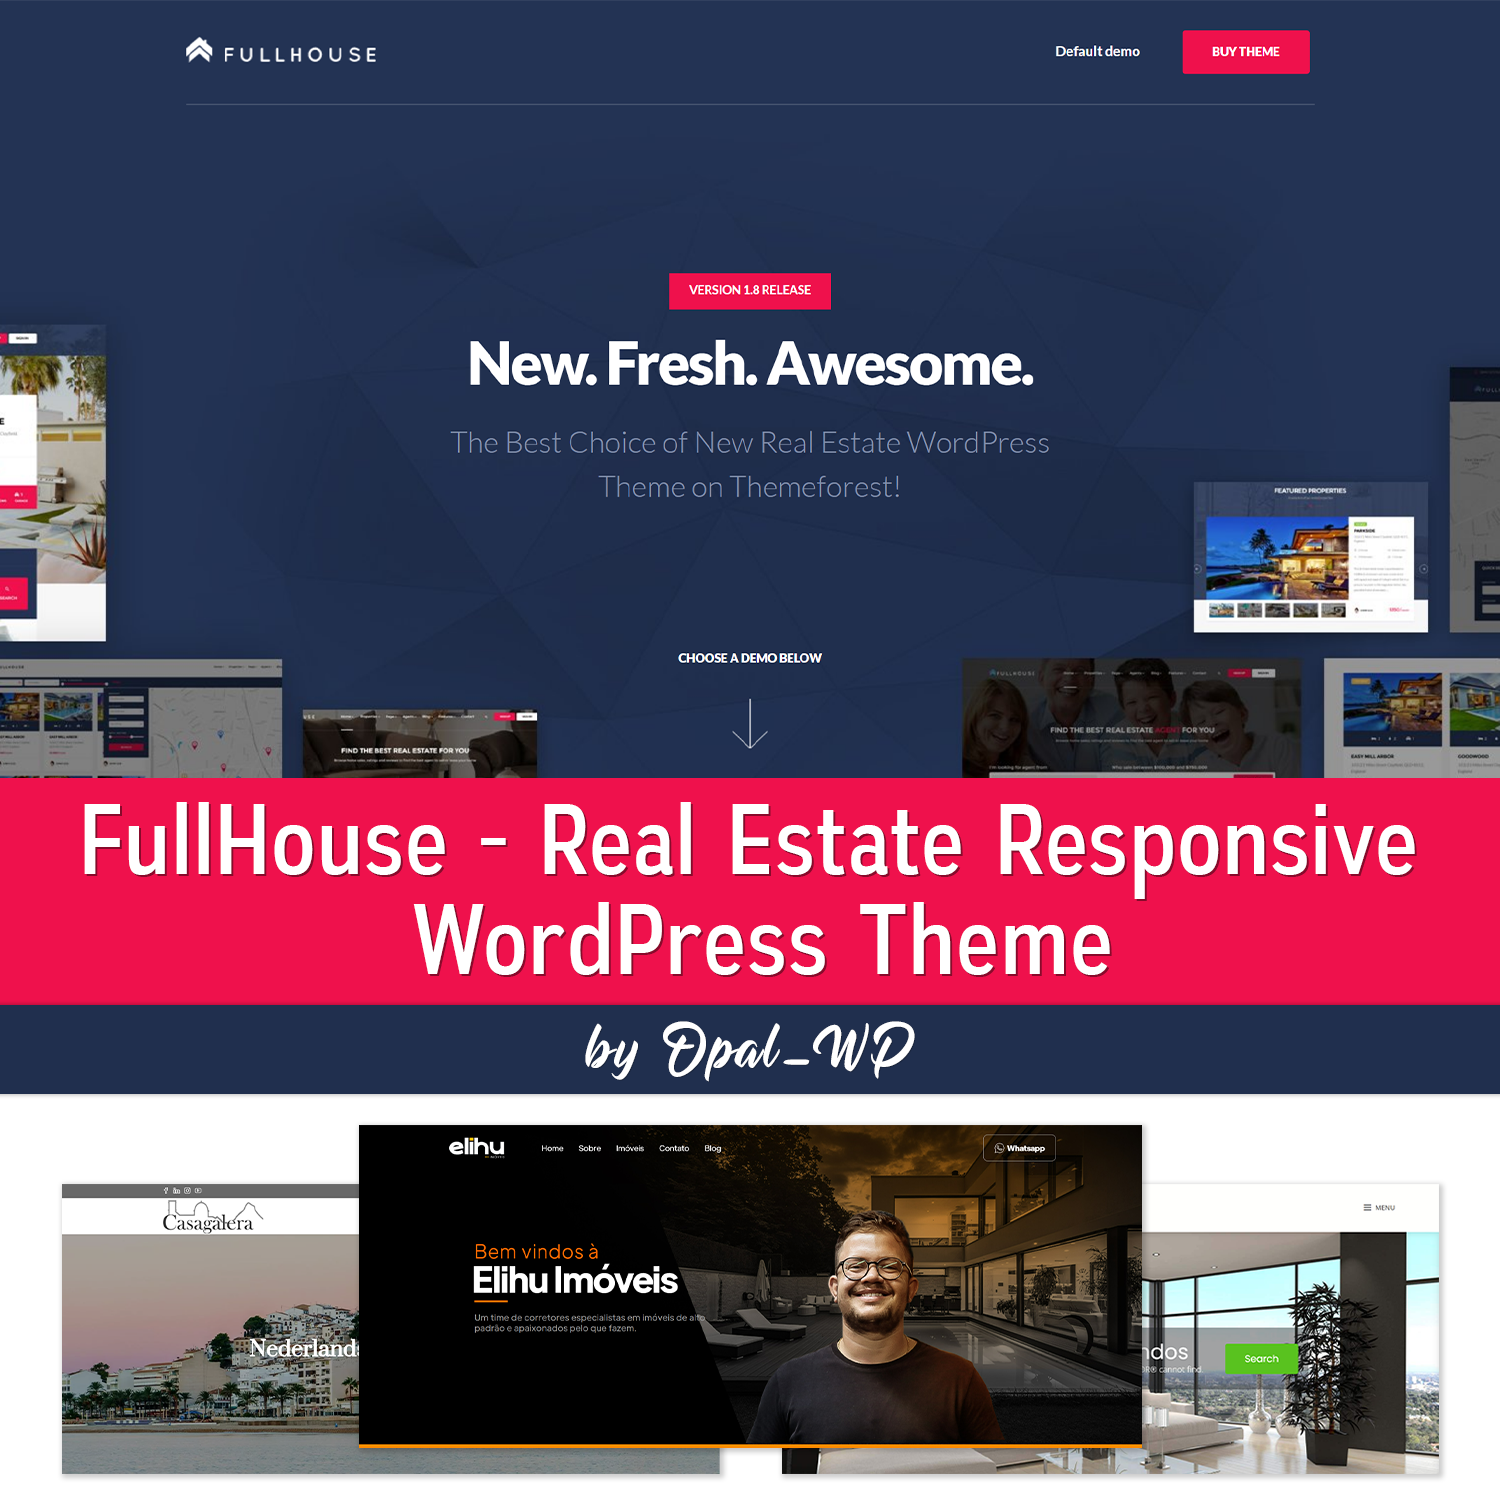 Images with fullhouse real estate responsive wordpress theme.